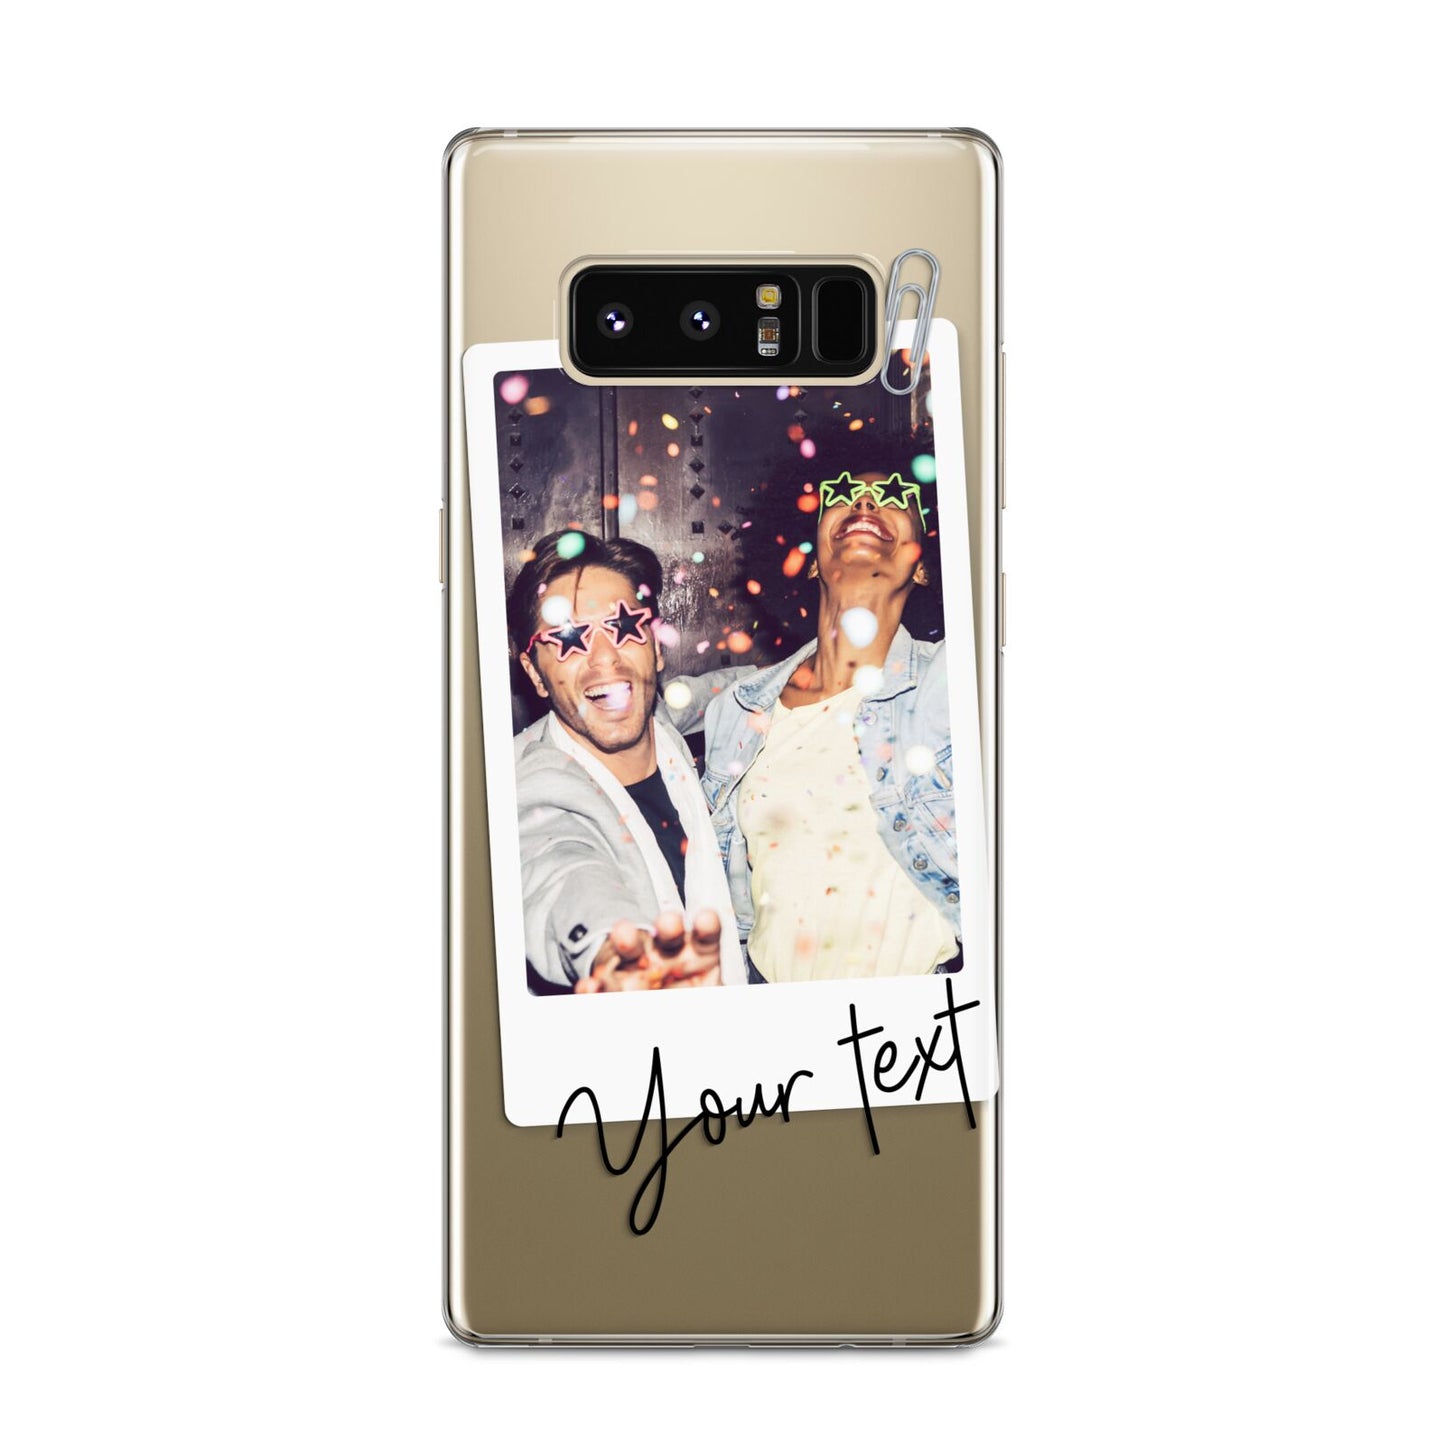 Personalised Photo with Text Samsung Galaxy S8 Case